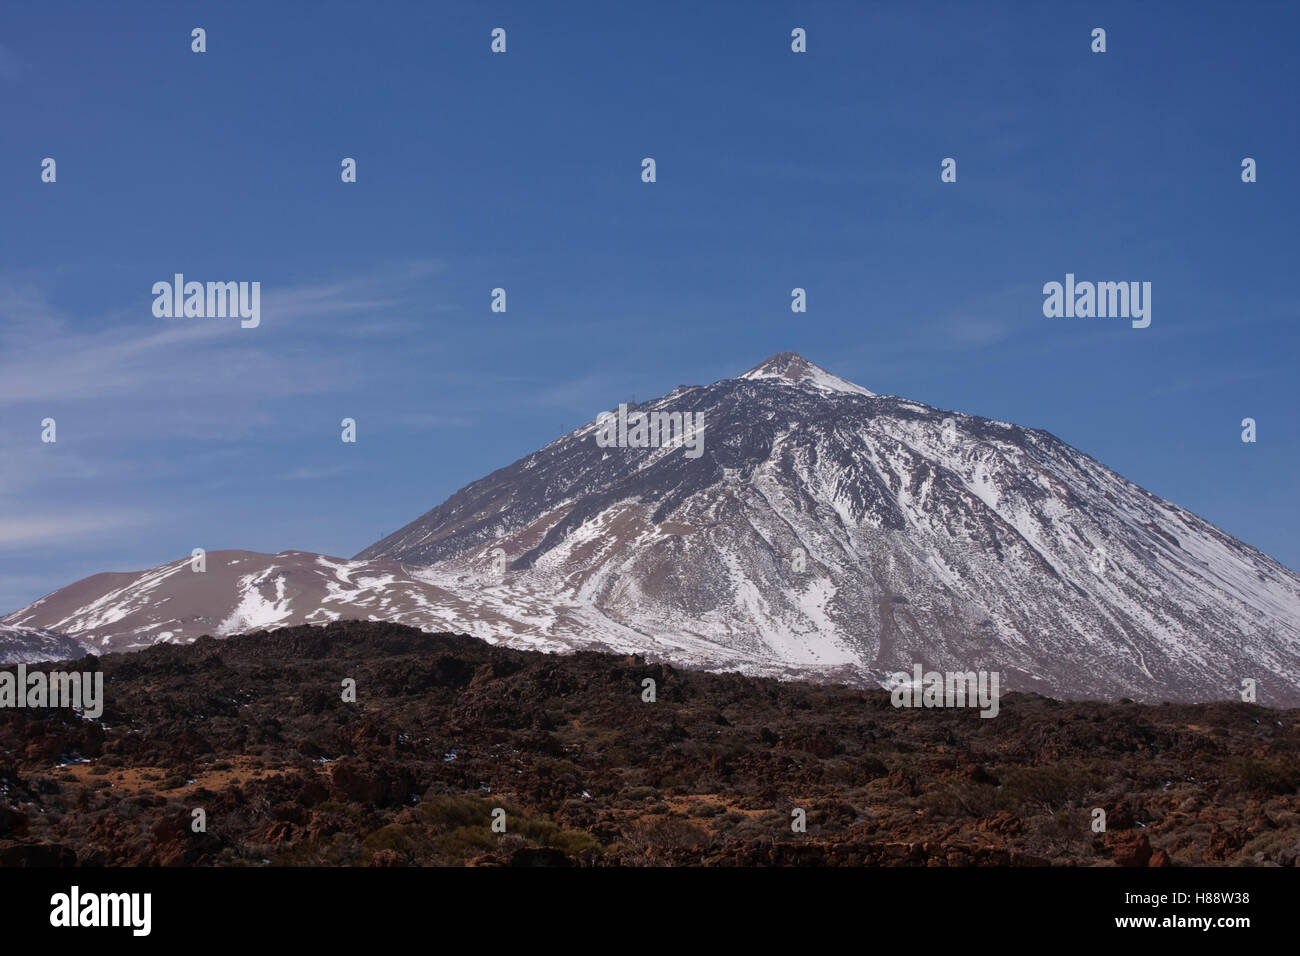 View of the Northwest face of Mount Teide, Tenerife, Spain, Europe Stock Photo